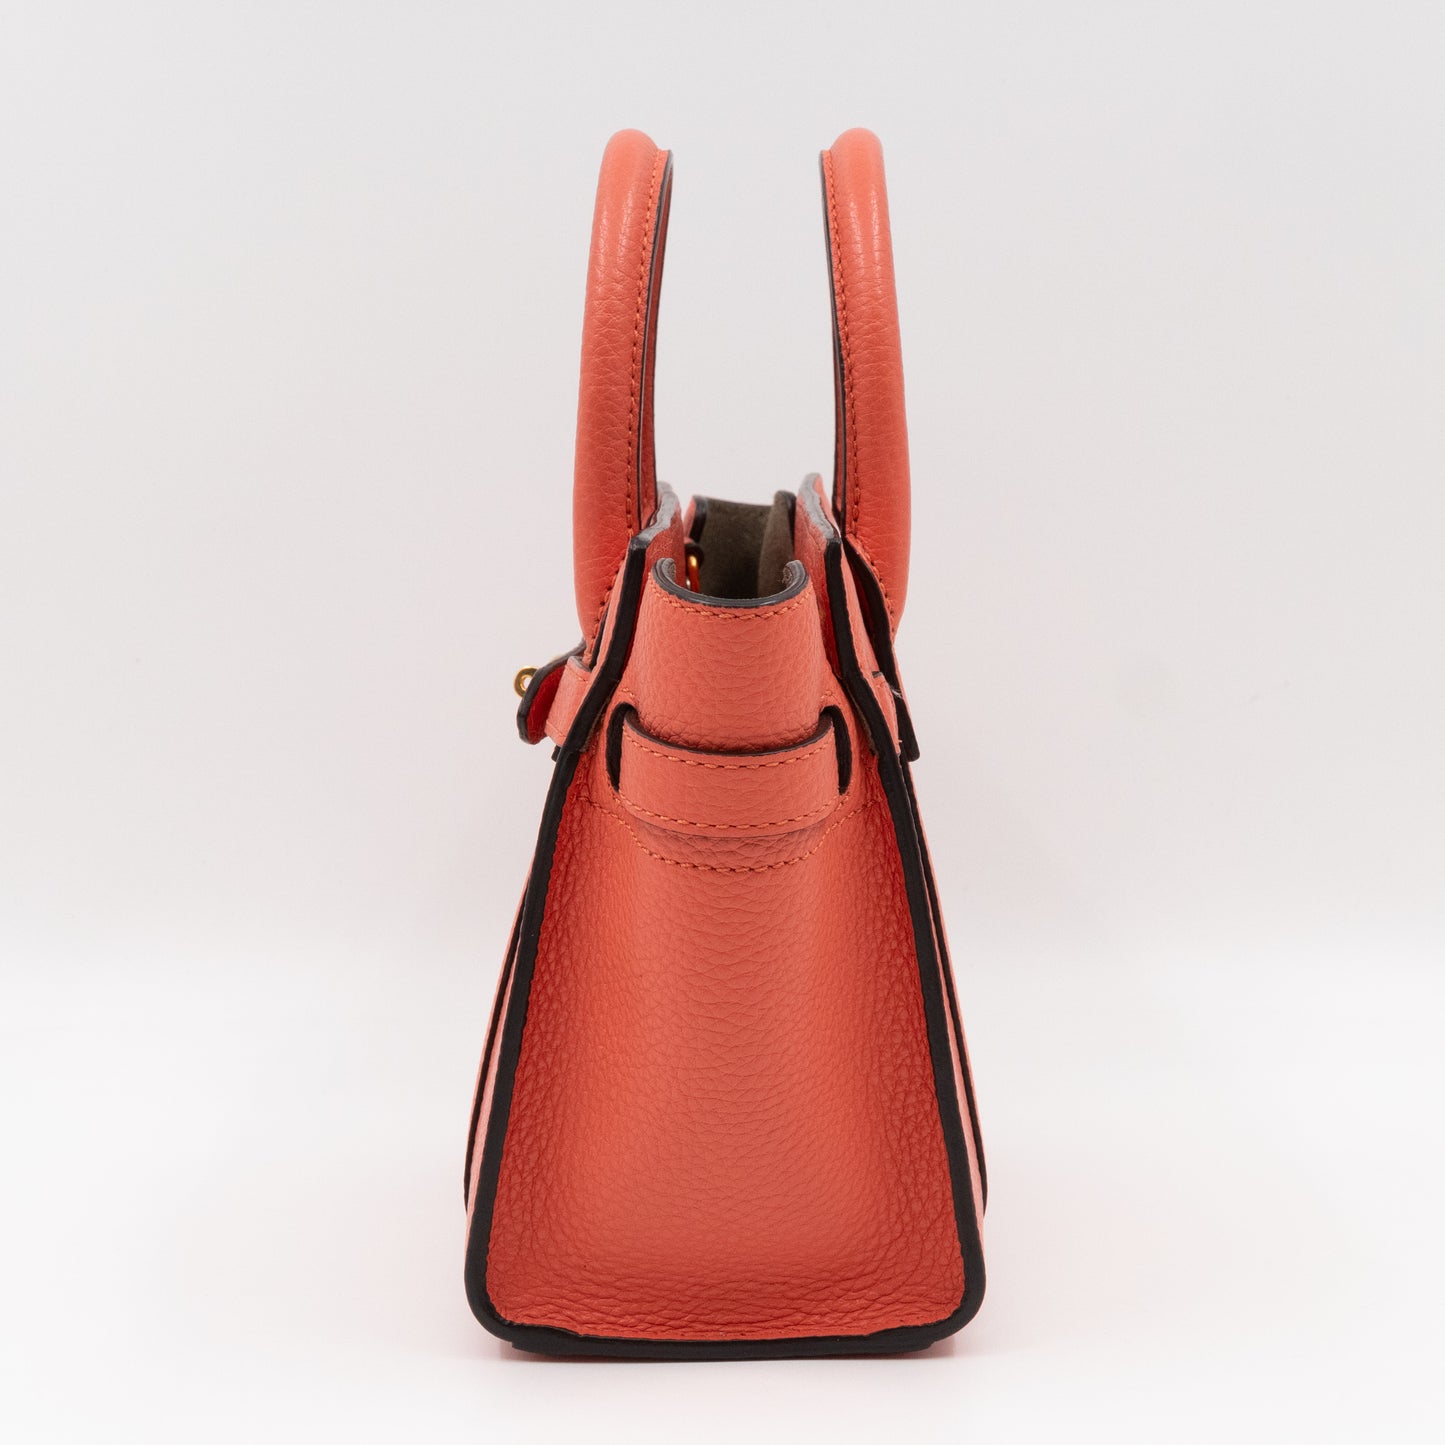 Micro Zipped Bayswater Coral Rose Leather